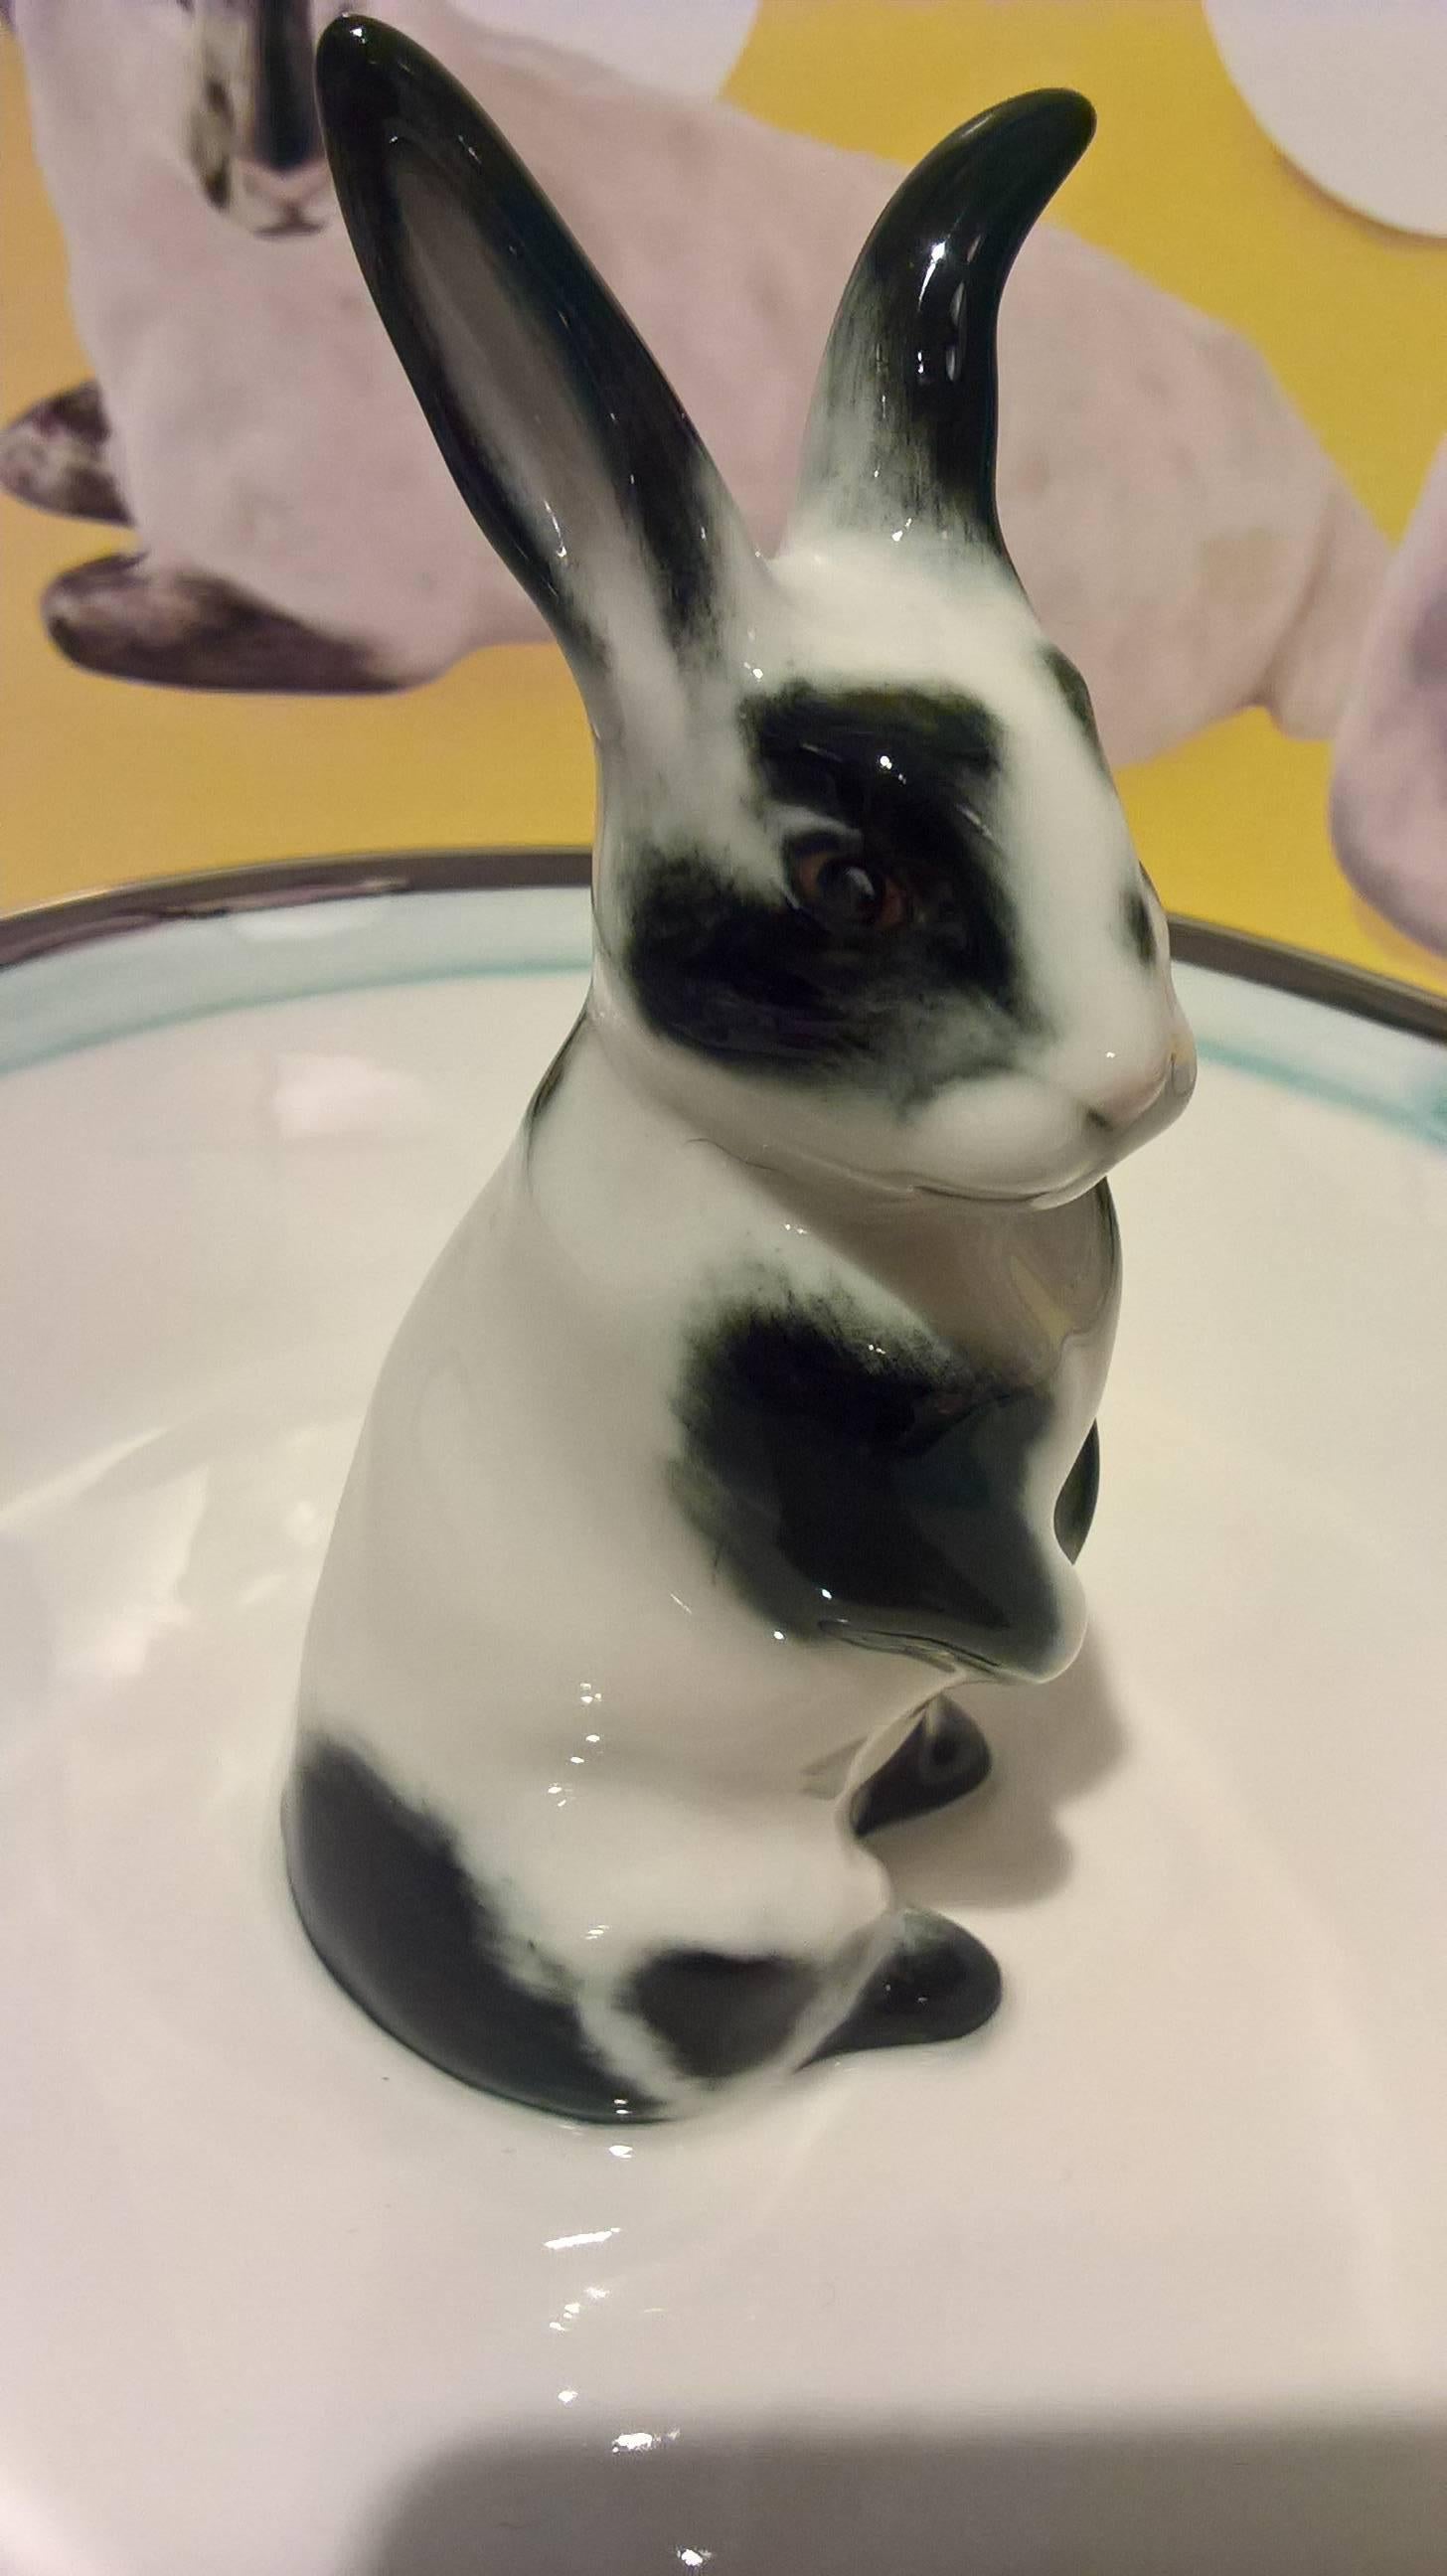 Charming completely handmade porcelain dish with a hands-free painted rabitt in a traditional Easter decor. The rabbit is painted in black and white decor sitting in the middle of the bowl. The dish is framed with a pale blue and platinum line.